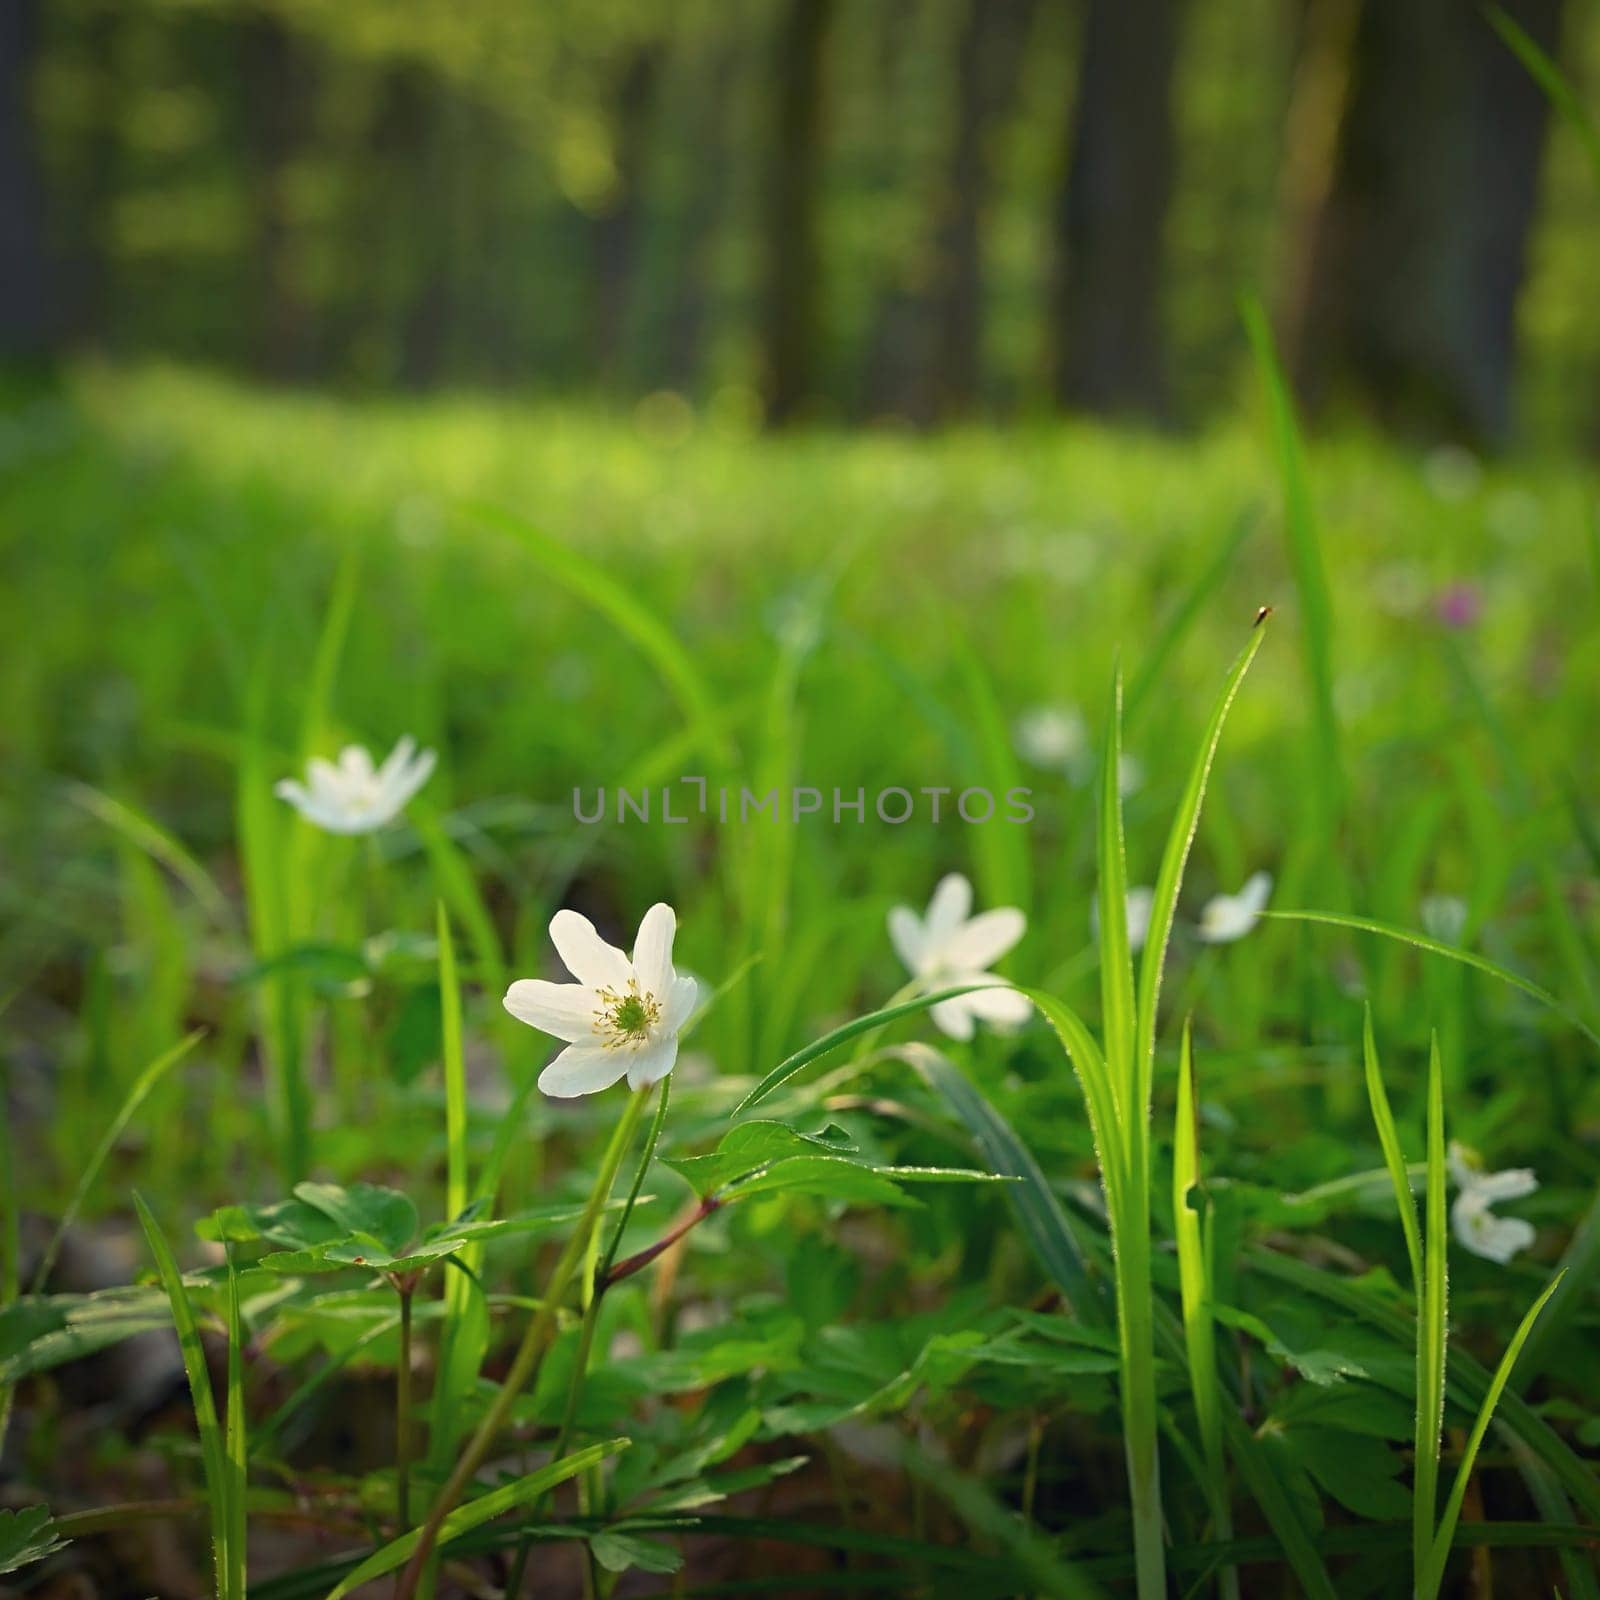 Beautiful little spring flower in the forest. (Anemonoides nemorosa) Spring time in nature